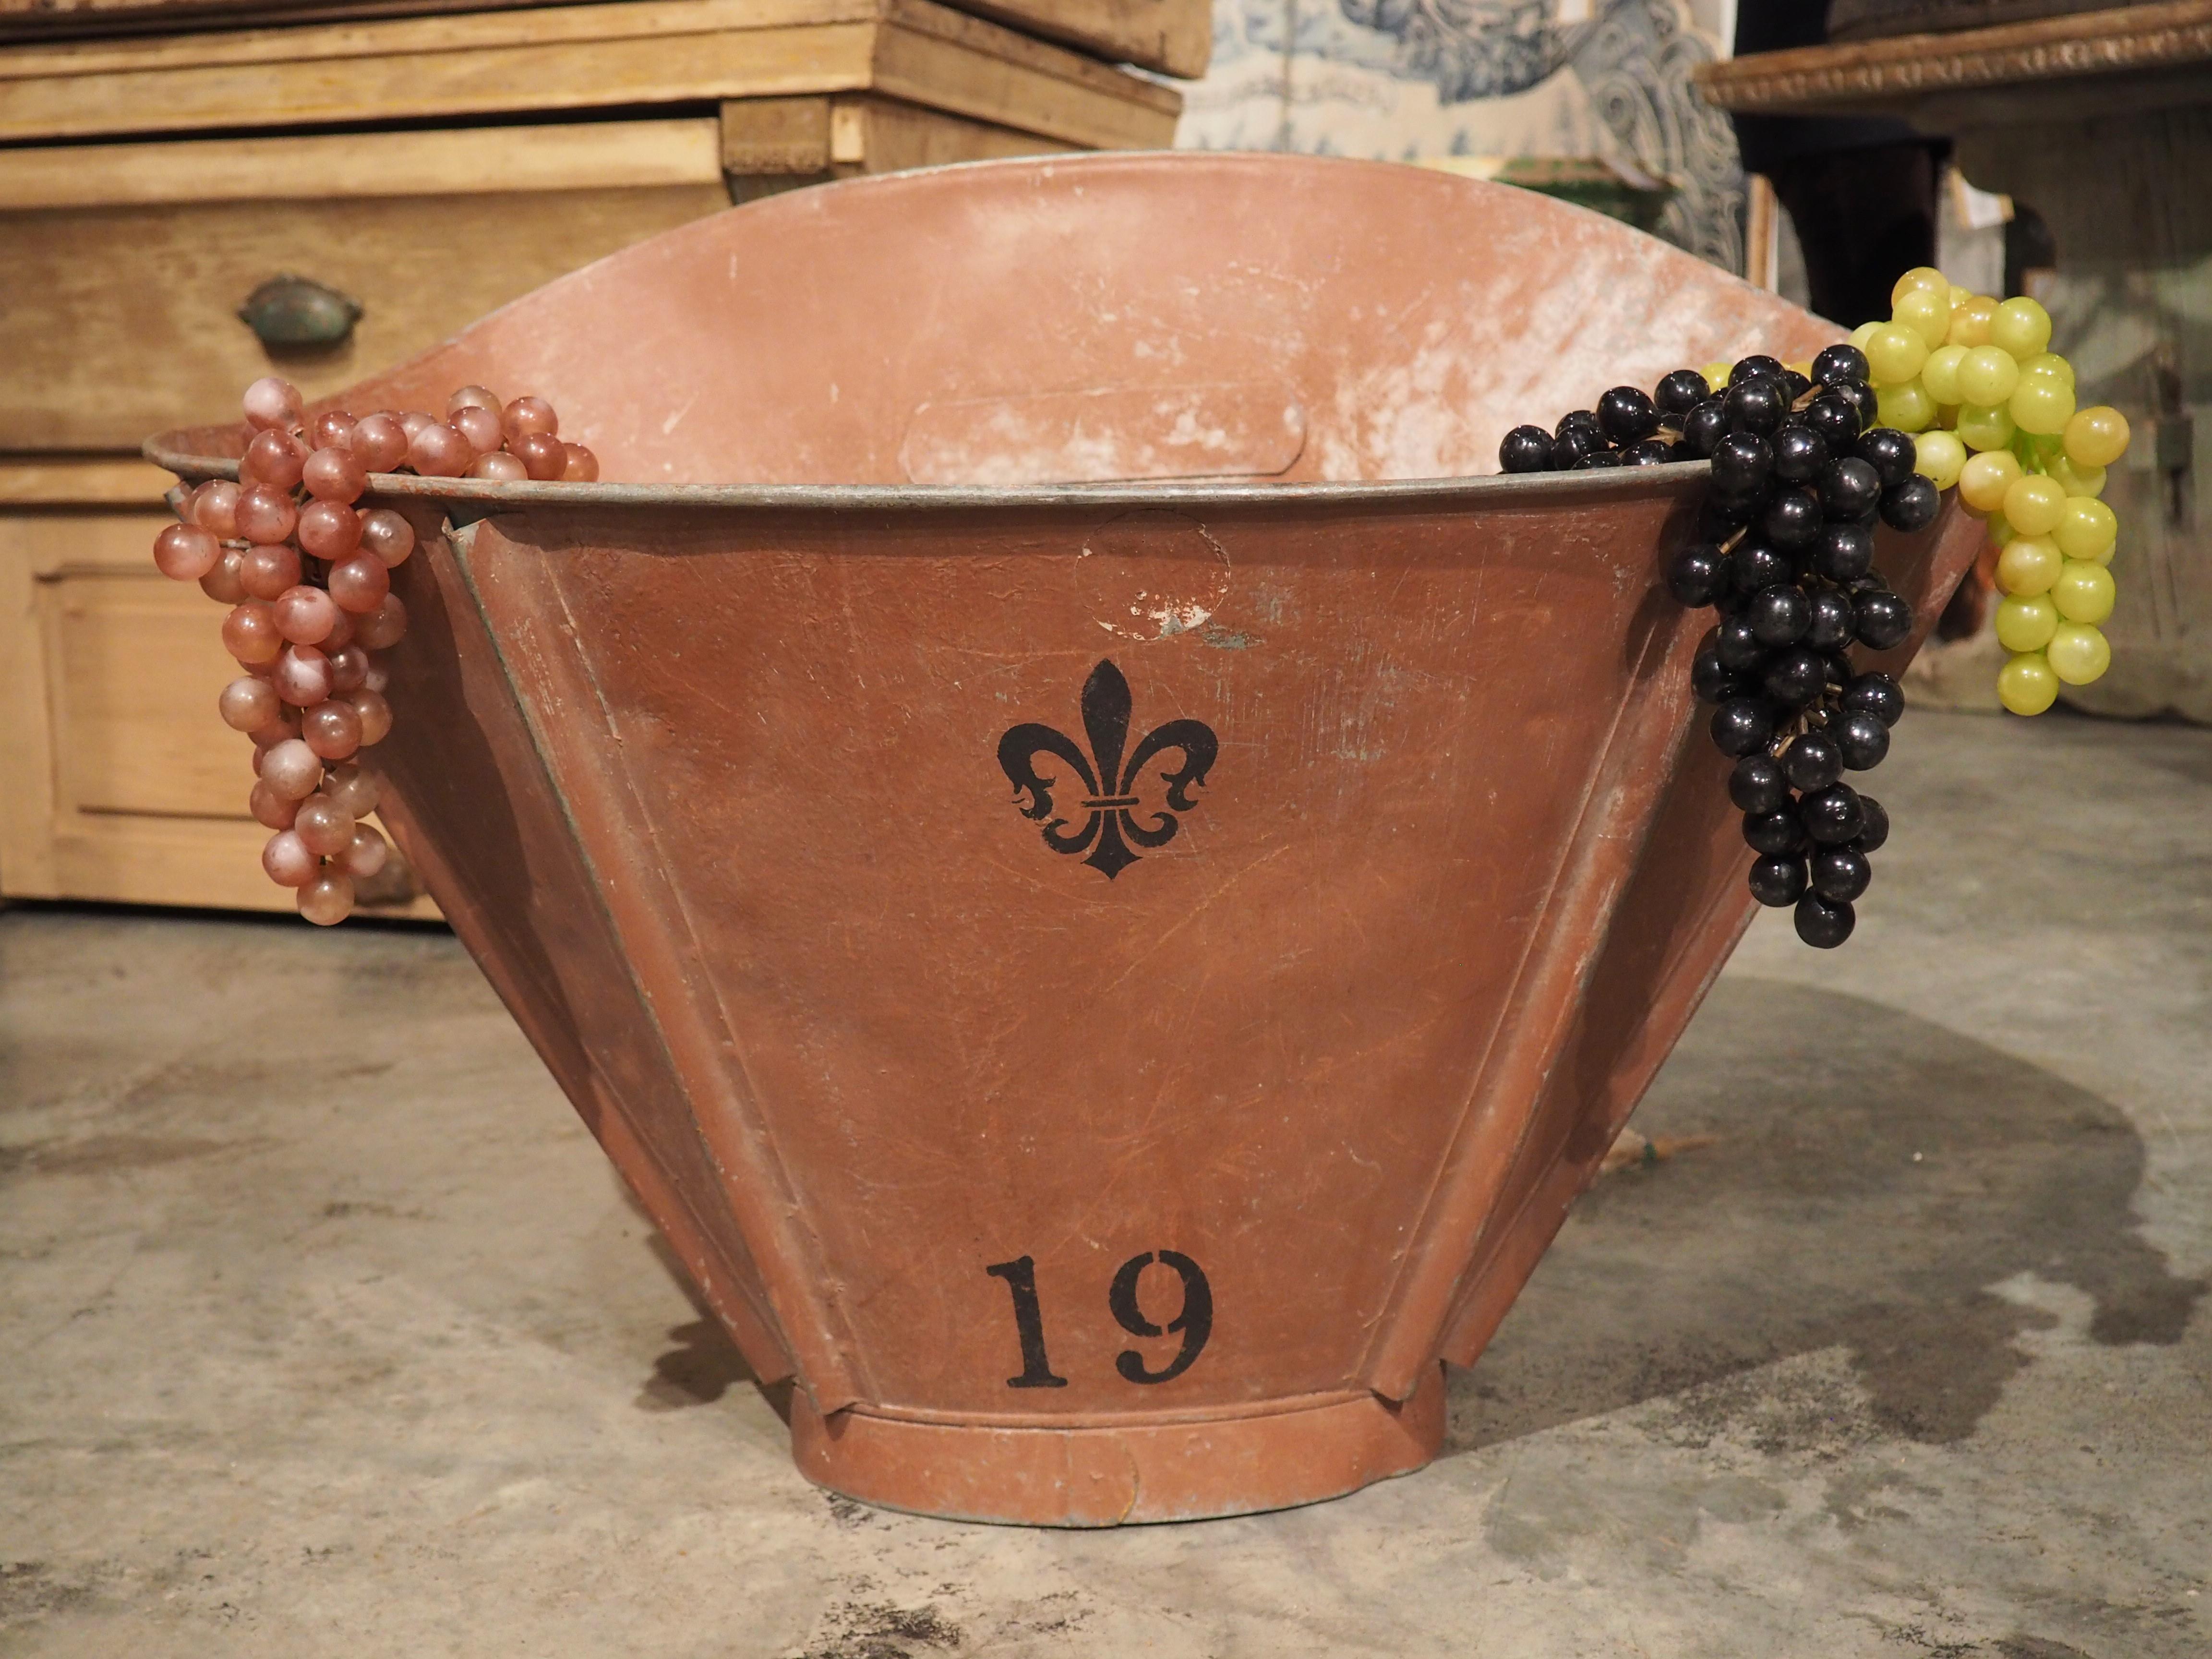 A large red hotte, with a black painted fleur de lys and the number “19”, this grape harvesting basket would have been used in Burgundy, France, during the 1800’s. The original canvas straps are still affixed to metal hooks on the back, which would